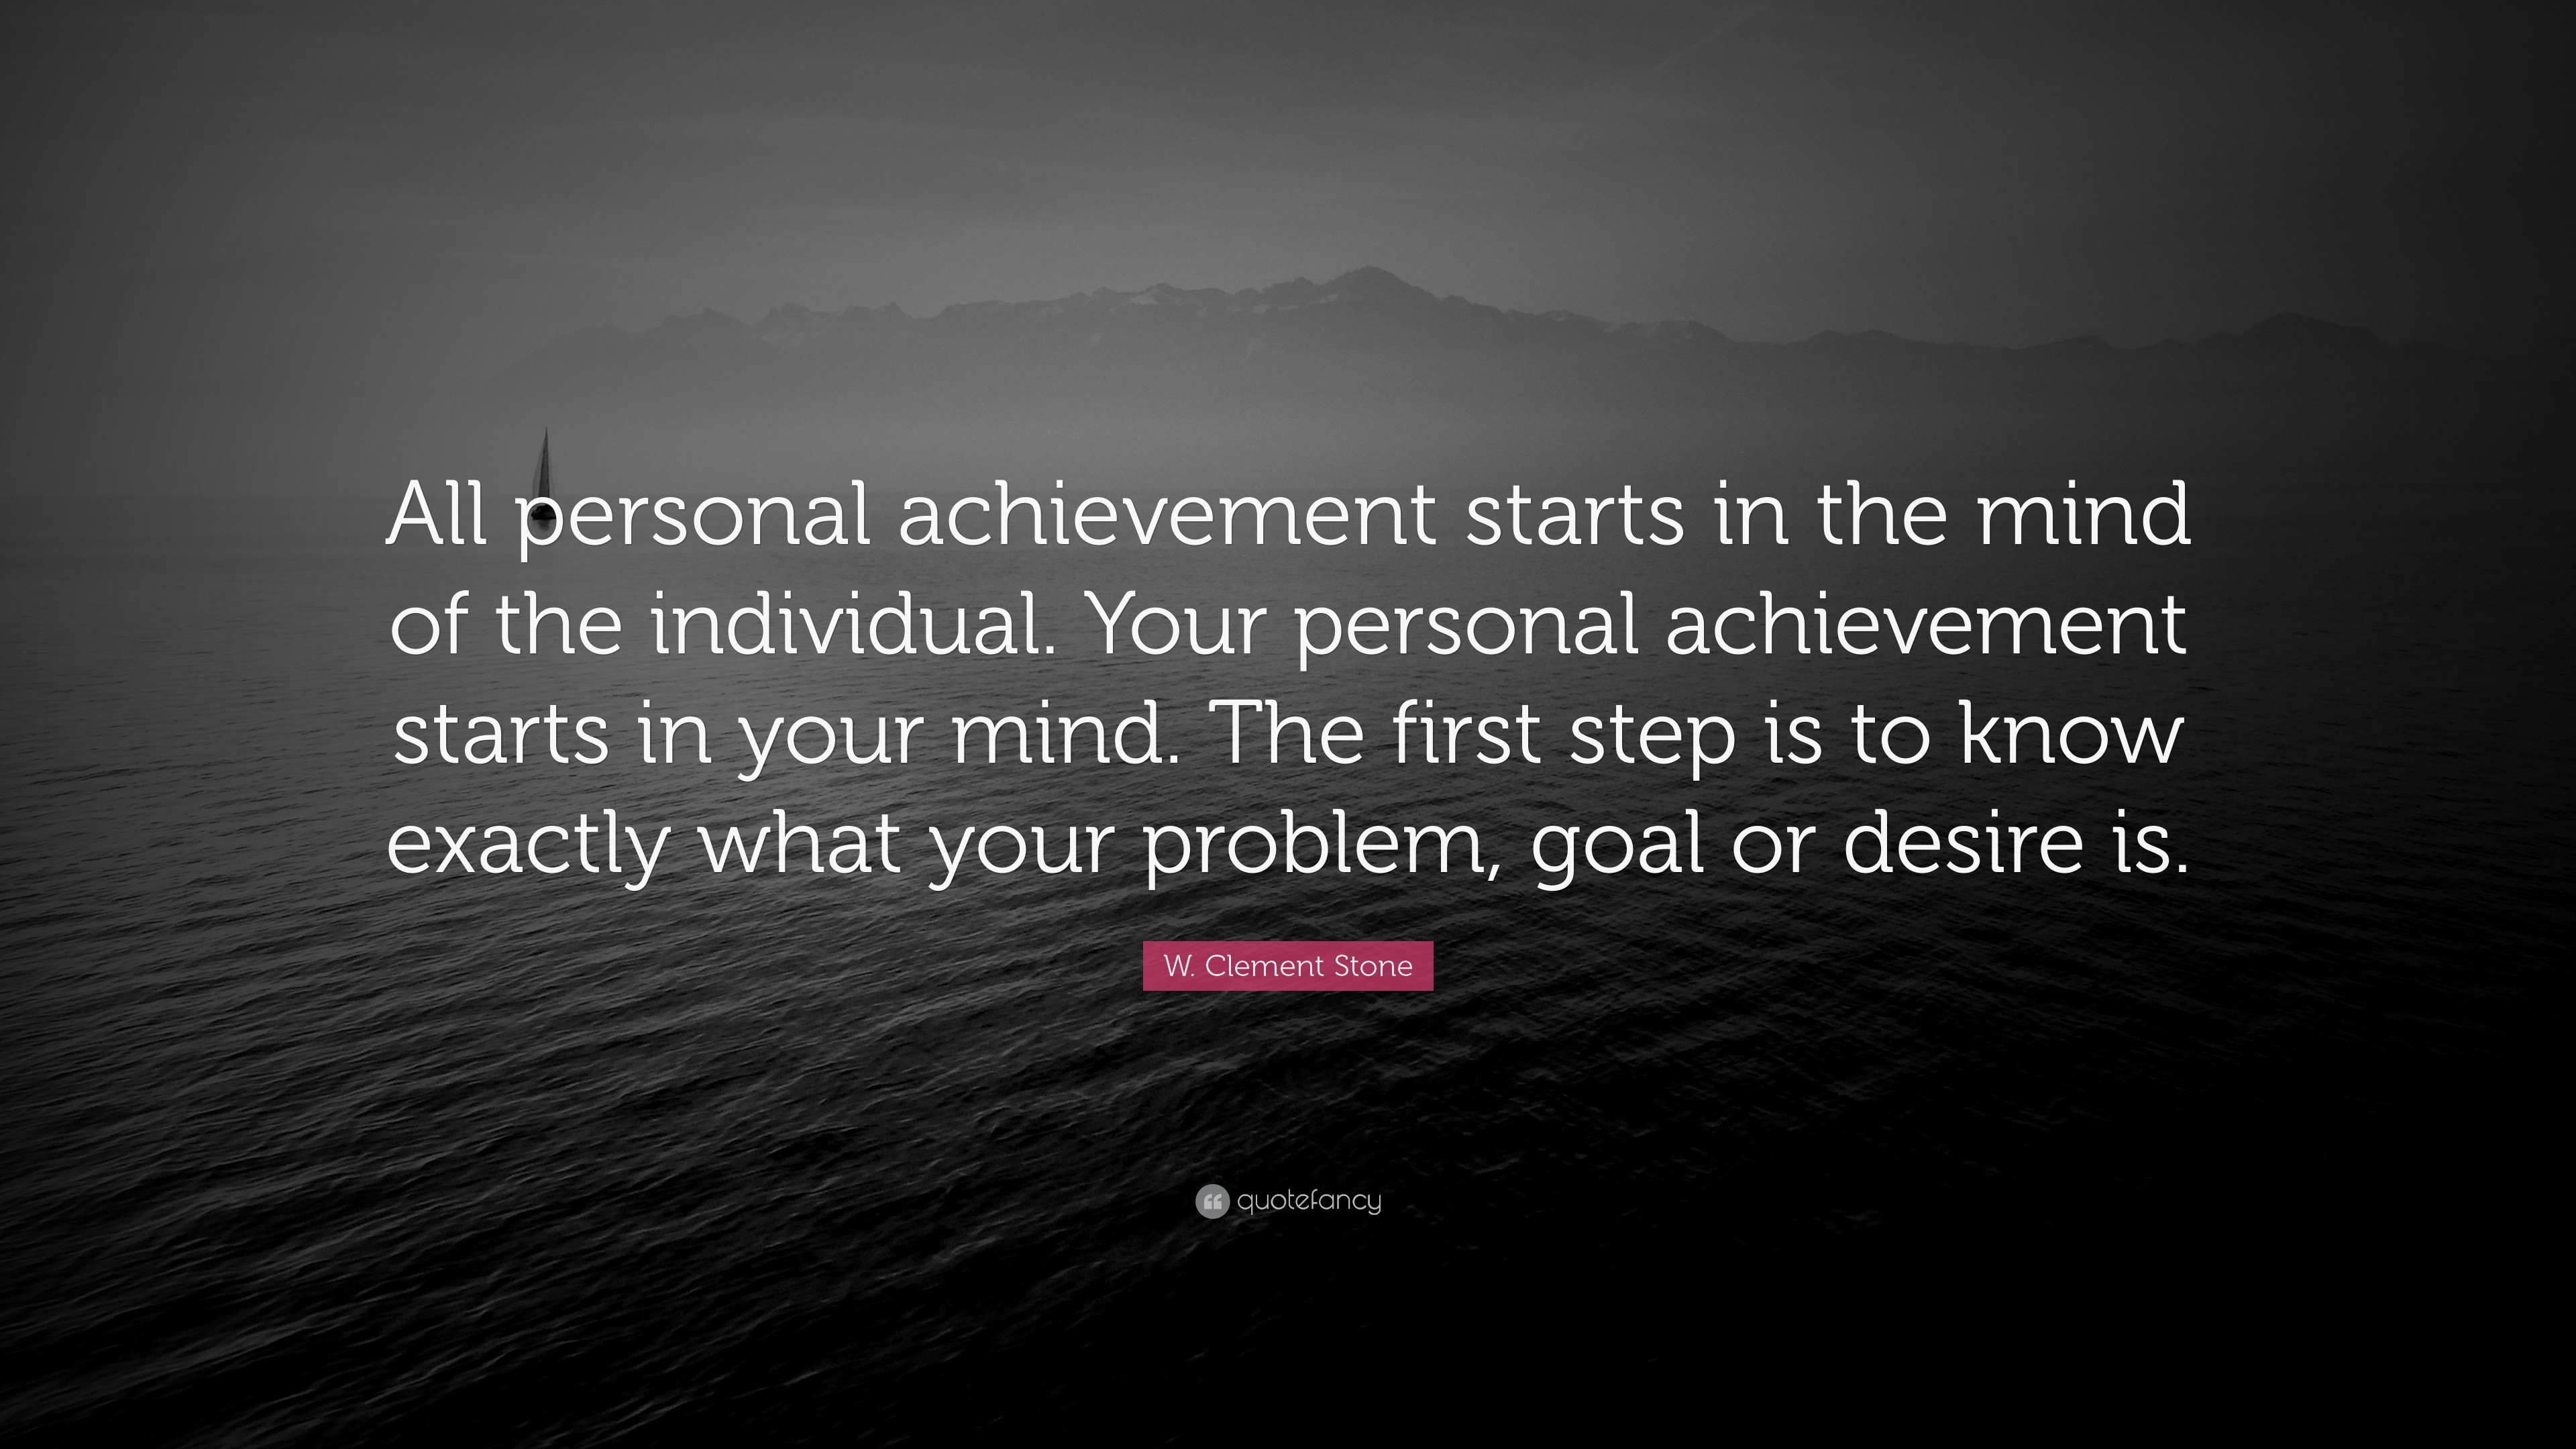 3840x2160 W. Clement Stone Quote: “All personal achievement starts in the mind of the